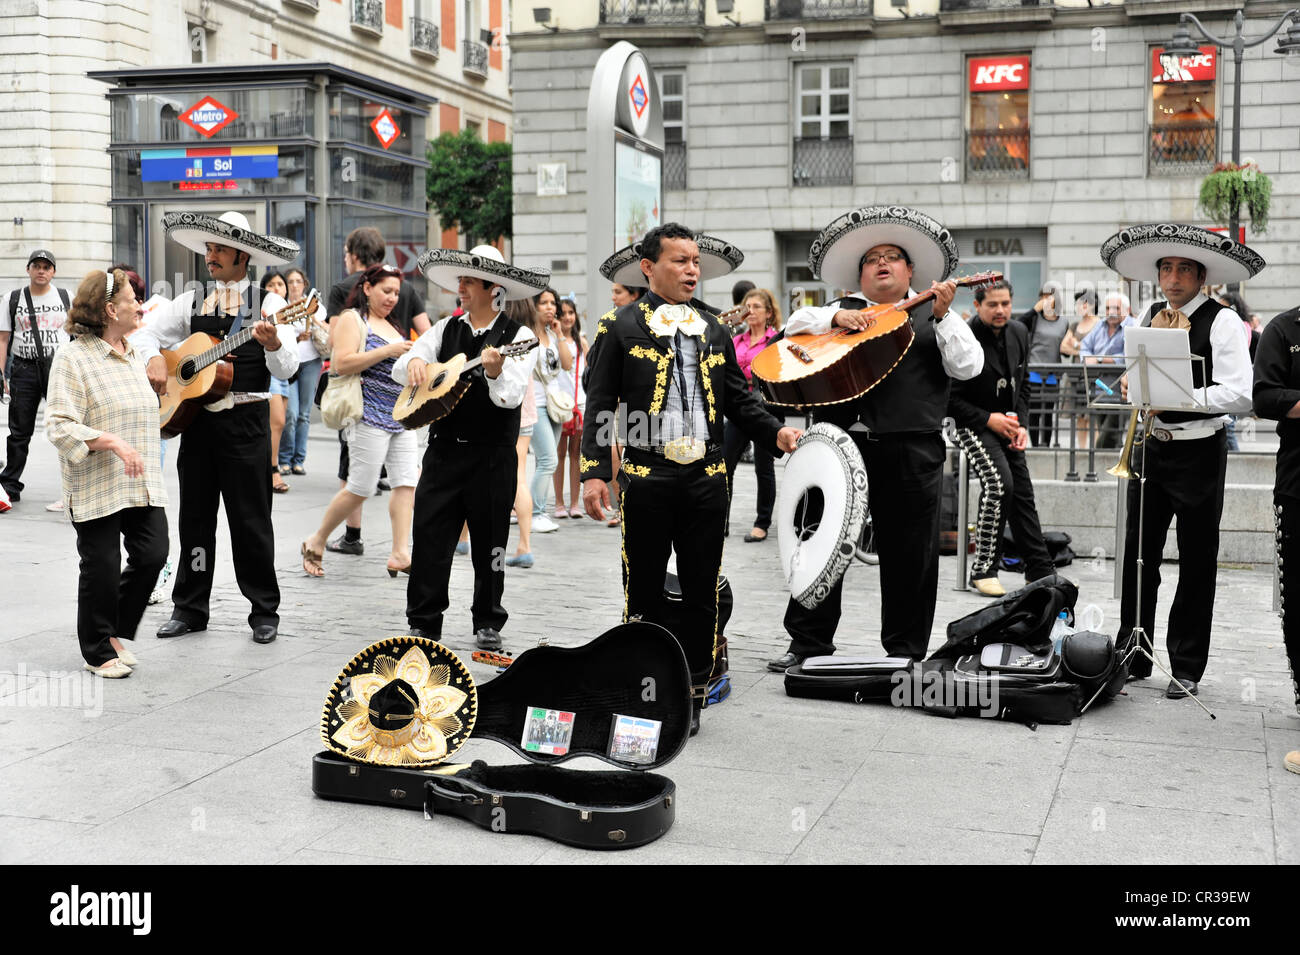 Mexican street musicians, Puerta del Sol, Madrid, Spain, Europe Stock Photo  - Alamy